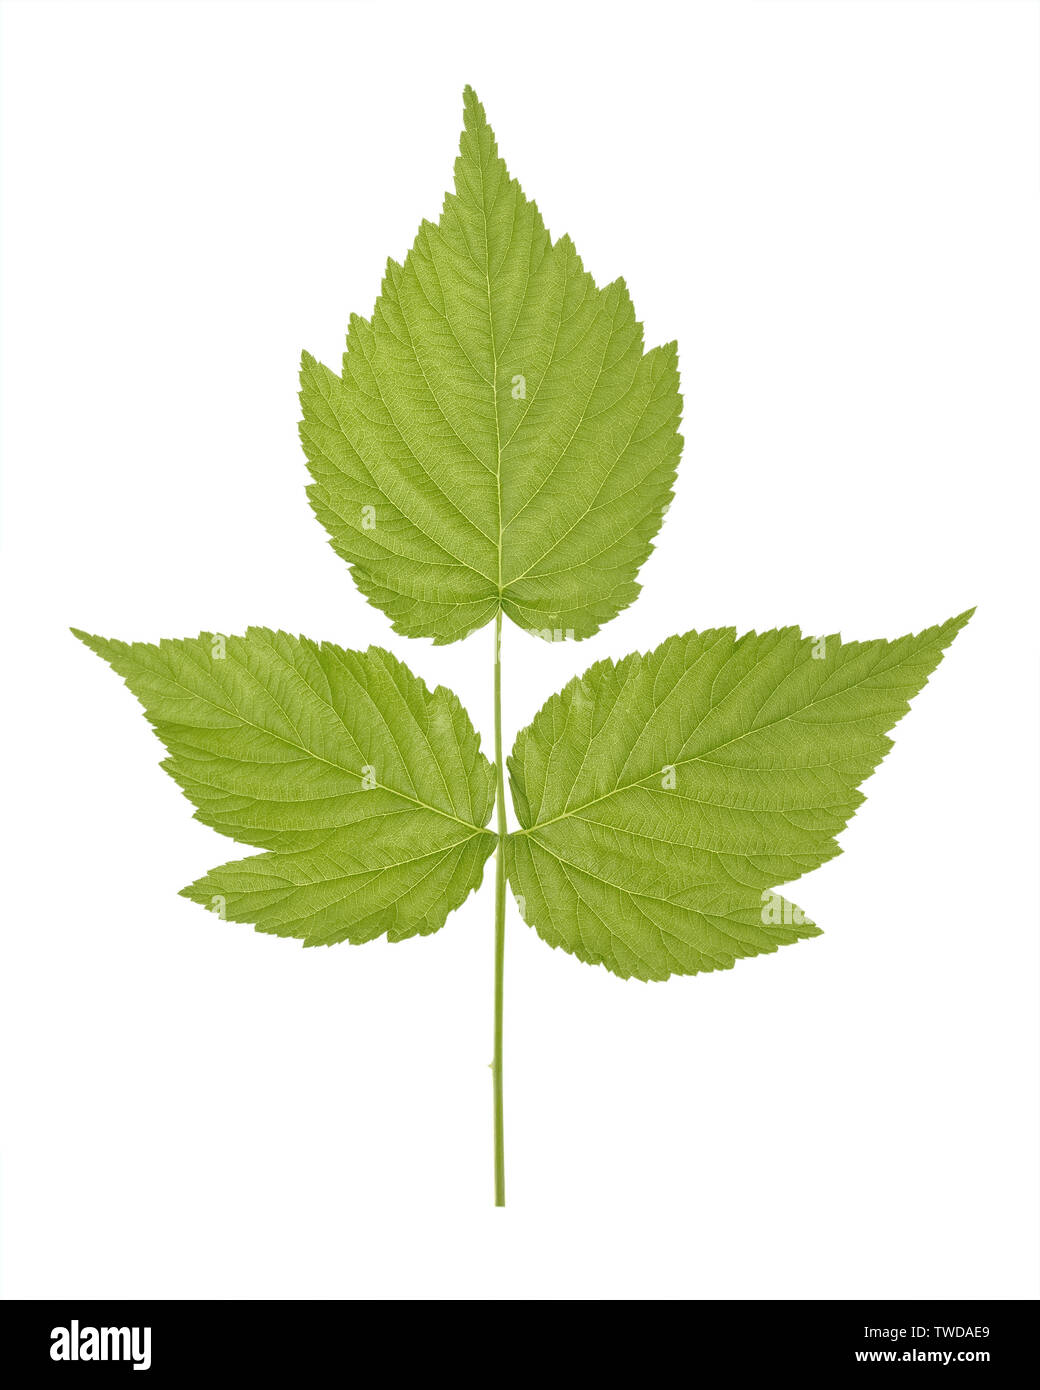 Green leaf of raspberries of plant species in the genus Rubus of the rose family, most of which are in the subgenus Idaeobatus isolated on white backg Stock Photo